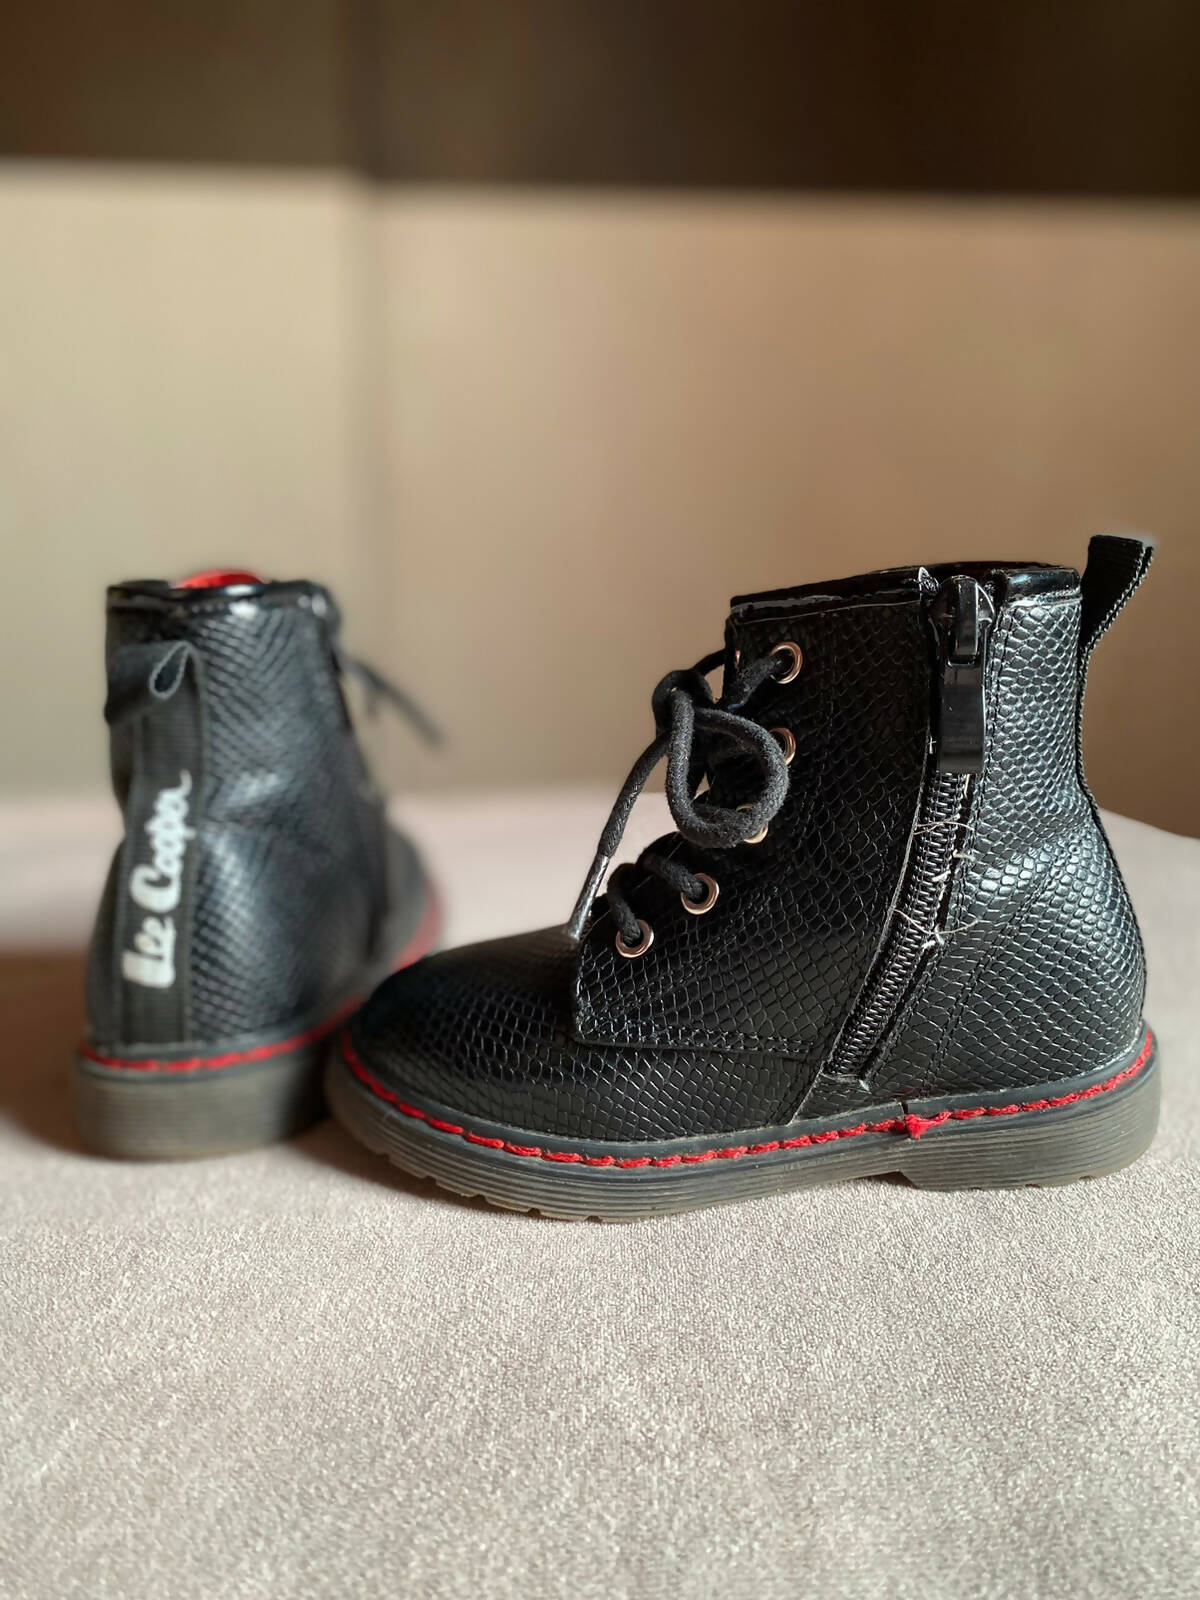 LEE COOPER Shoes For Kids